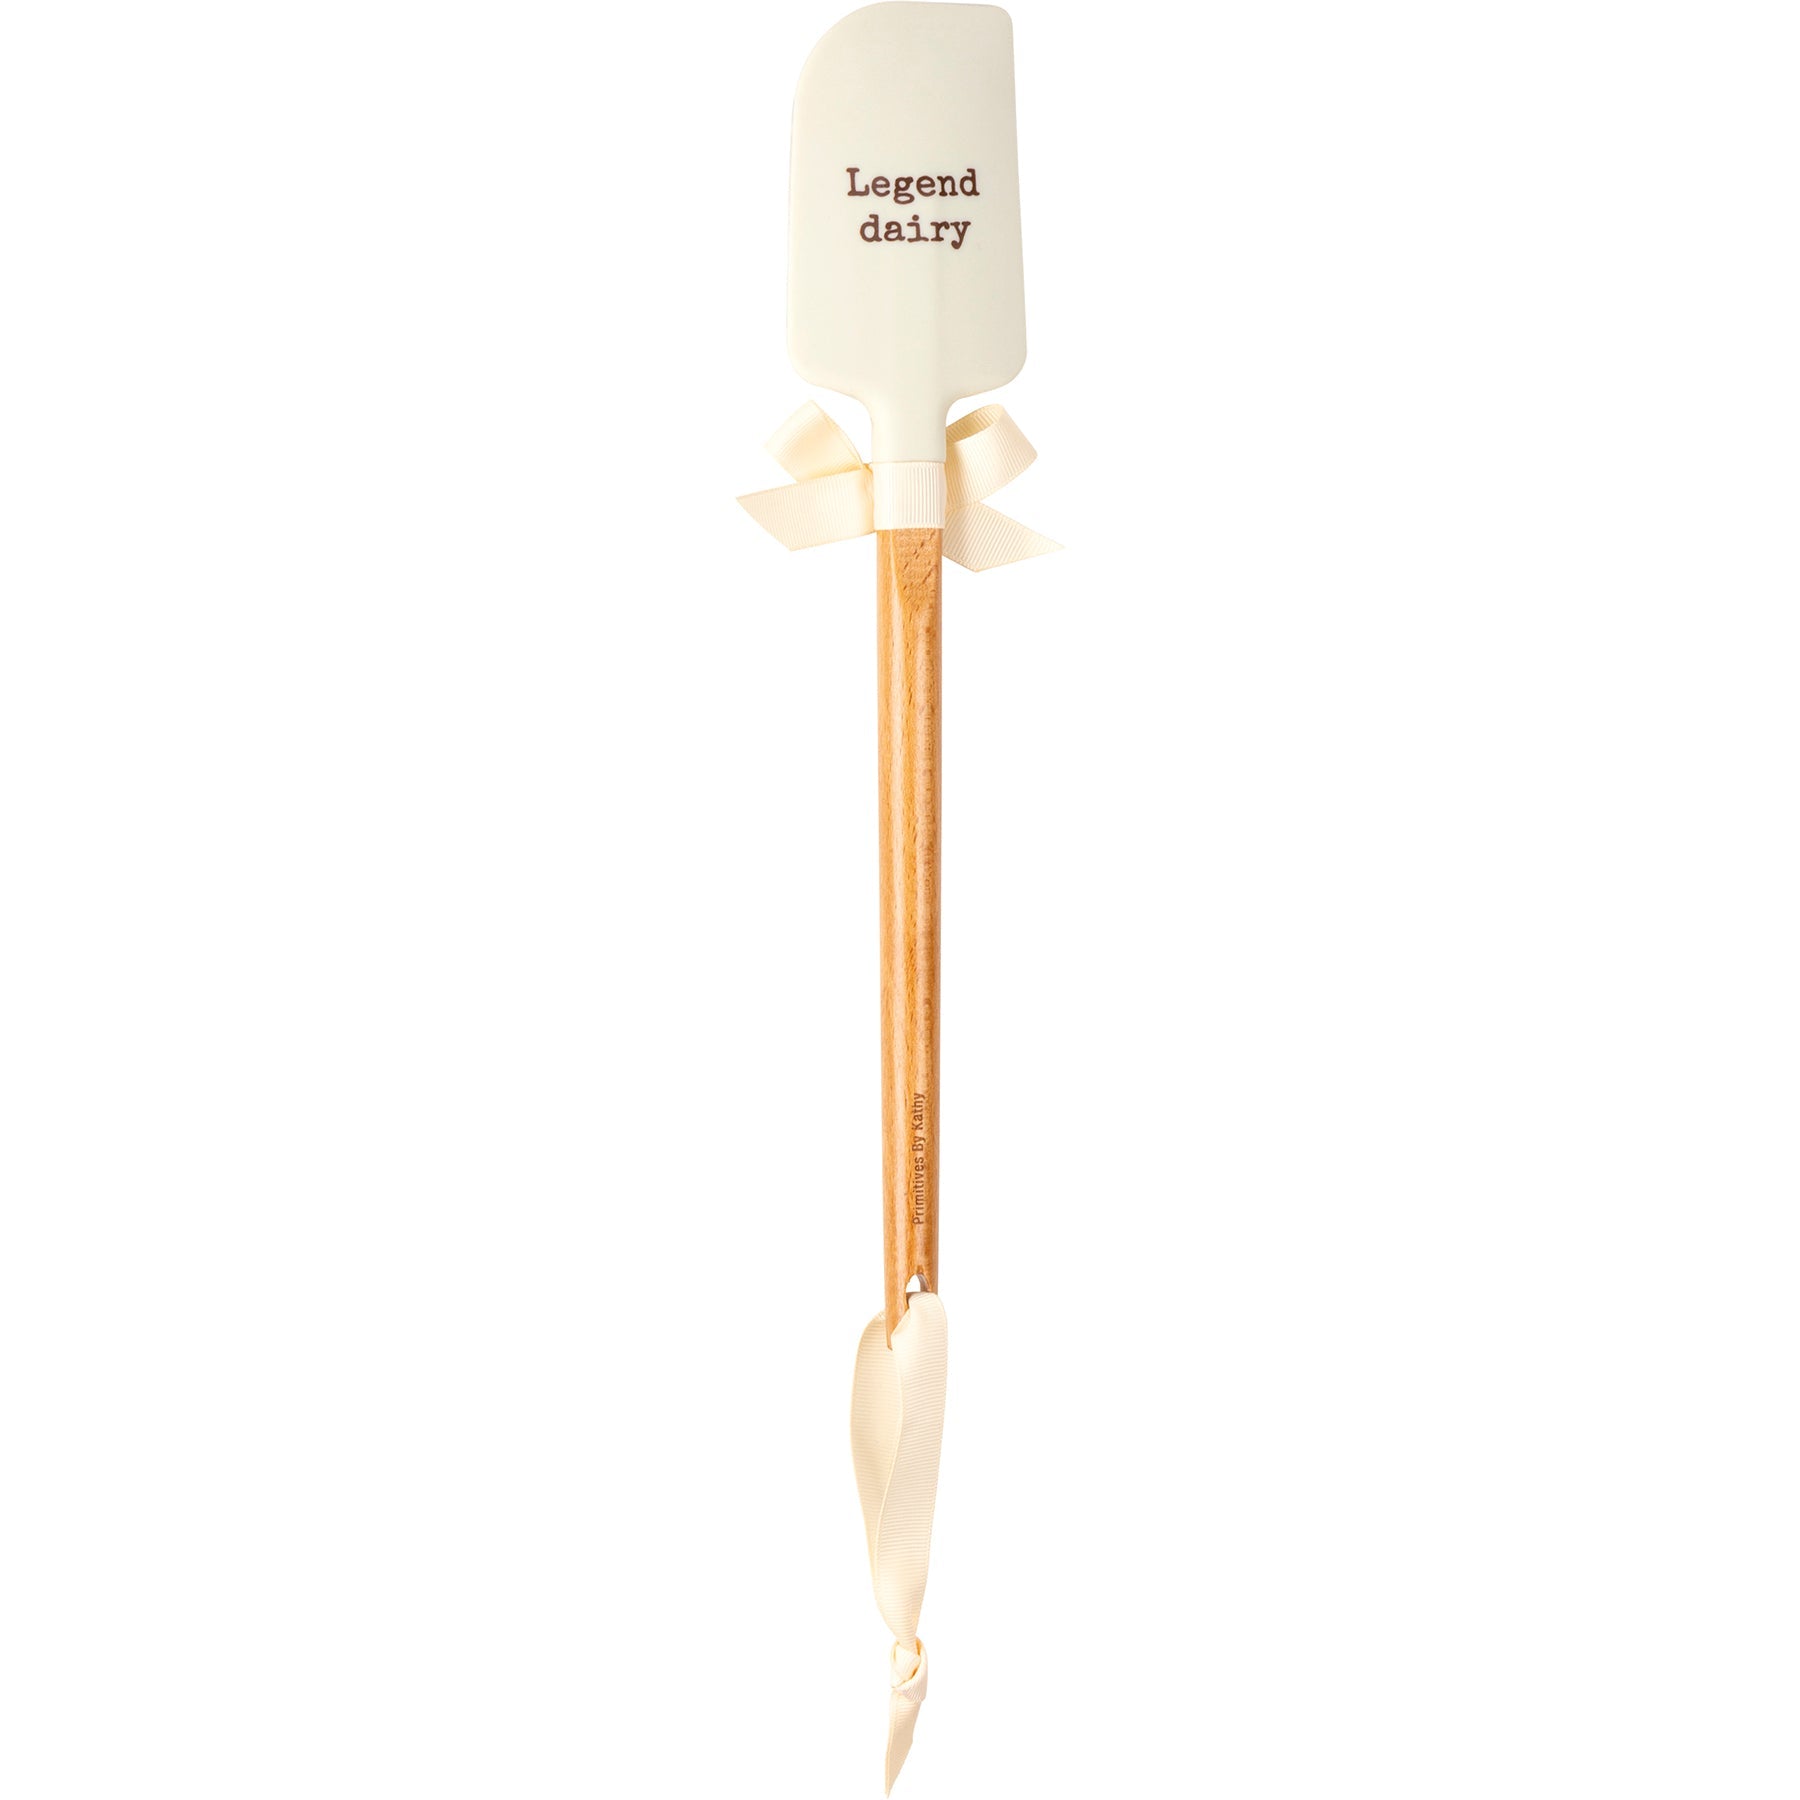 Legend Dairy Cow Spatula With A Wooden Handle